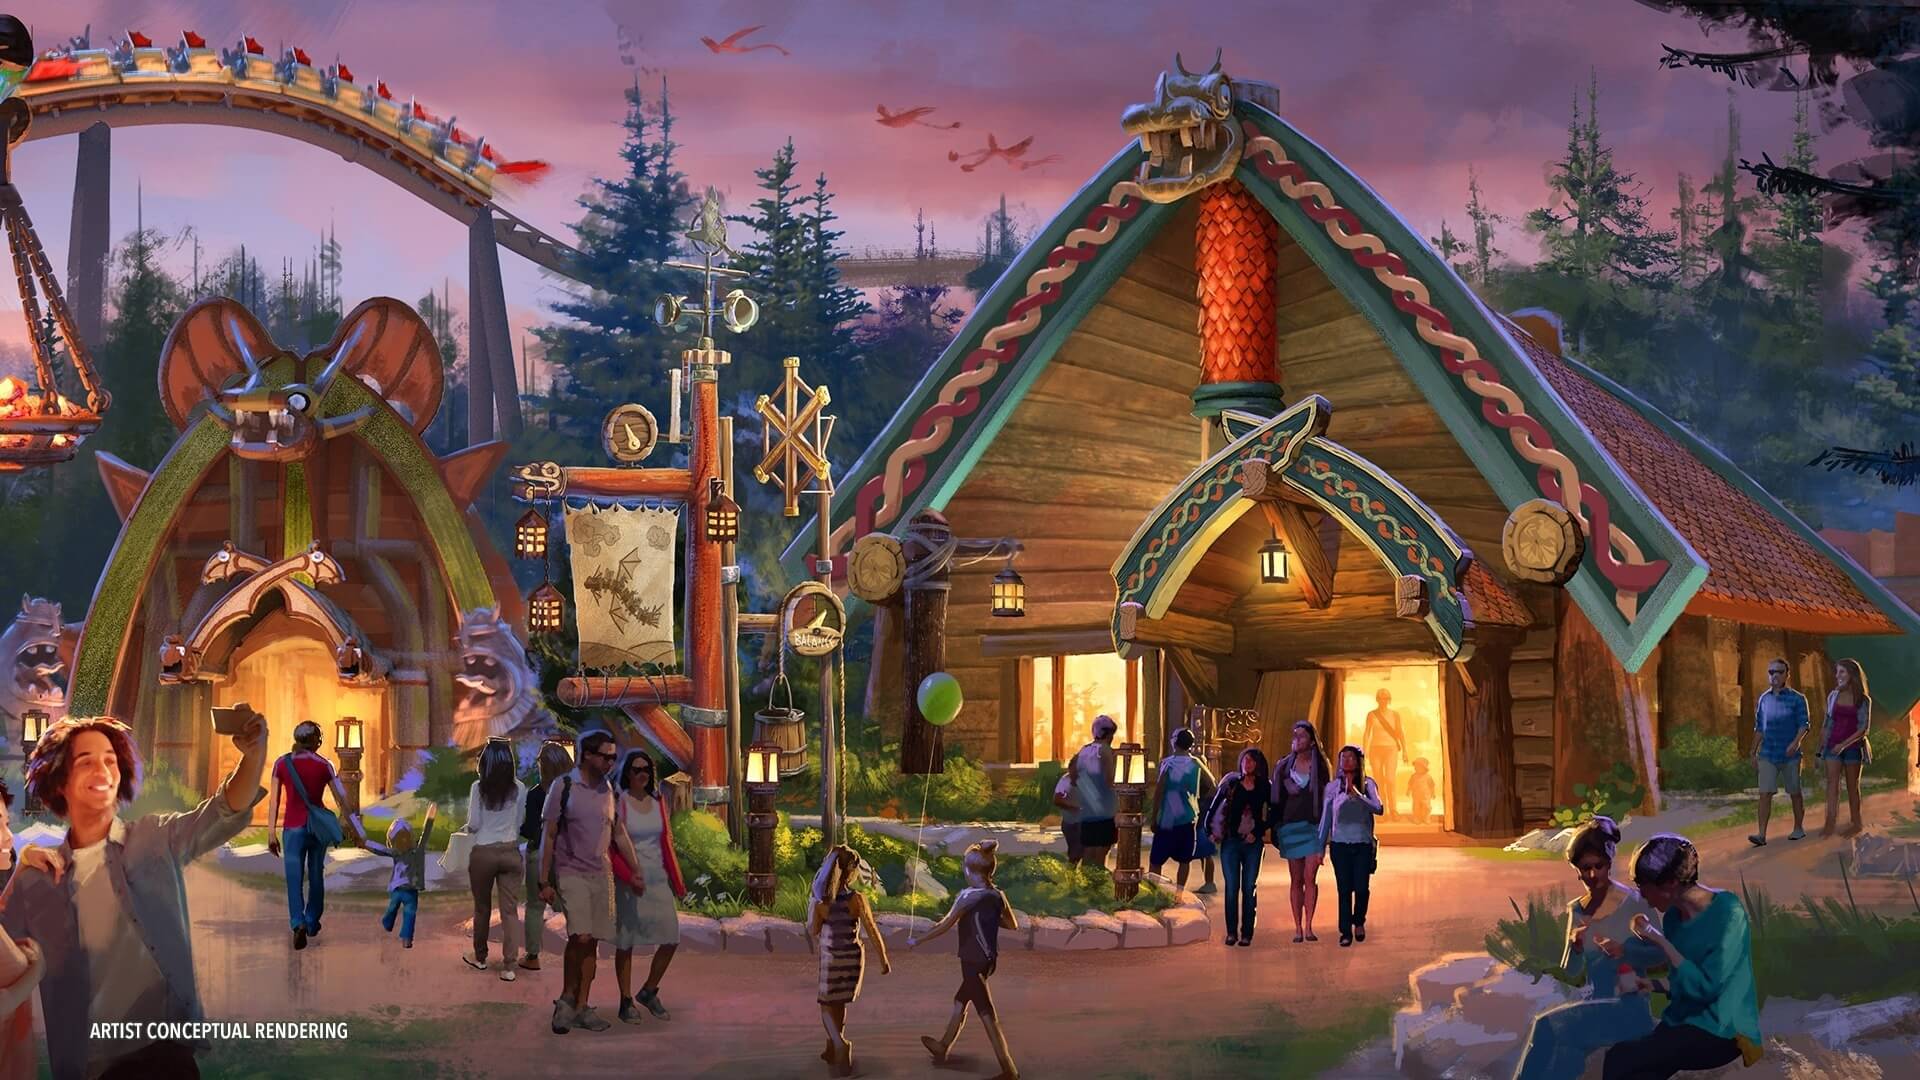 Here’s everything you’ll be able to see, eat, and ride inside Universal Studios’ future How To Train Your Dragon land